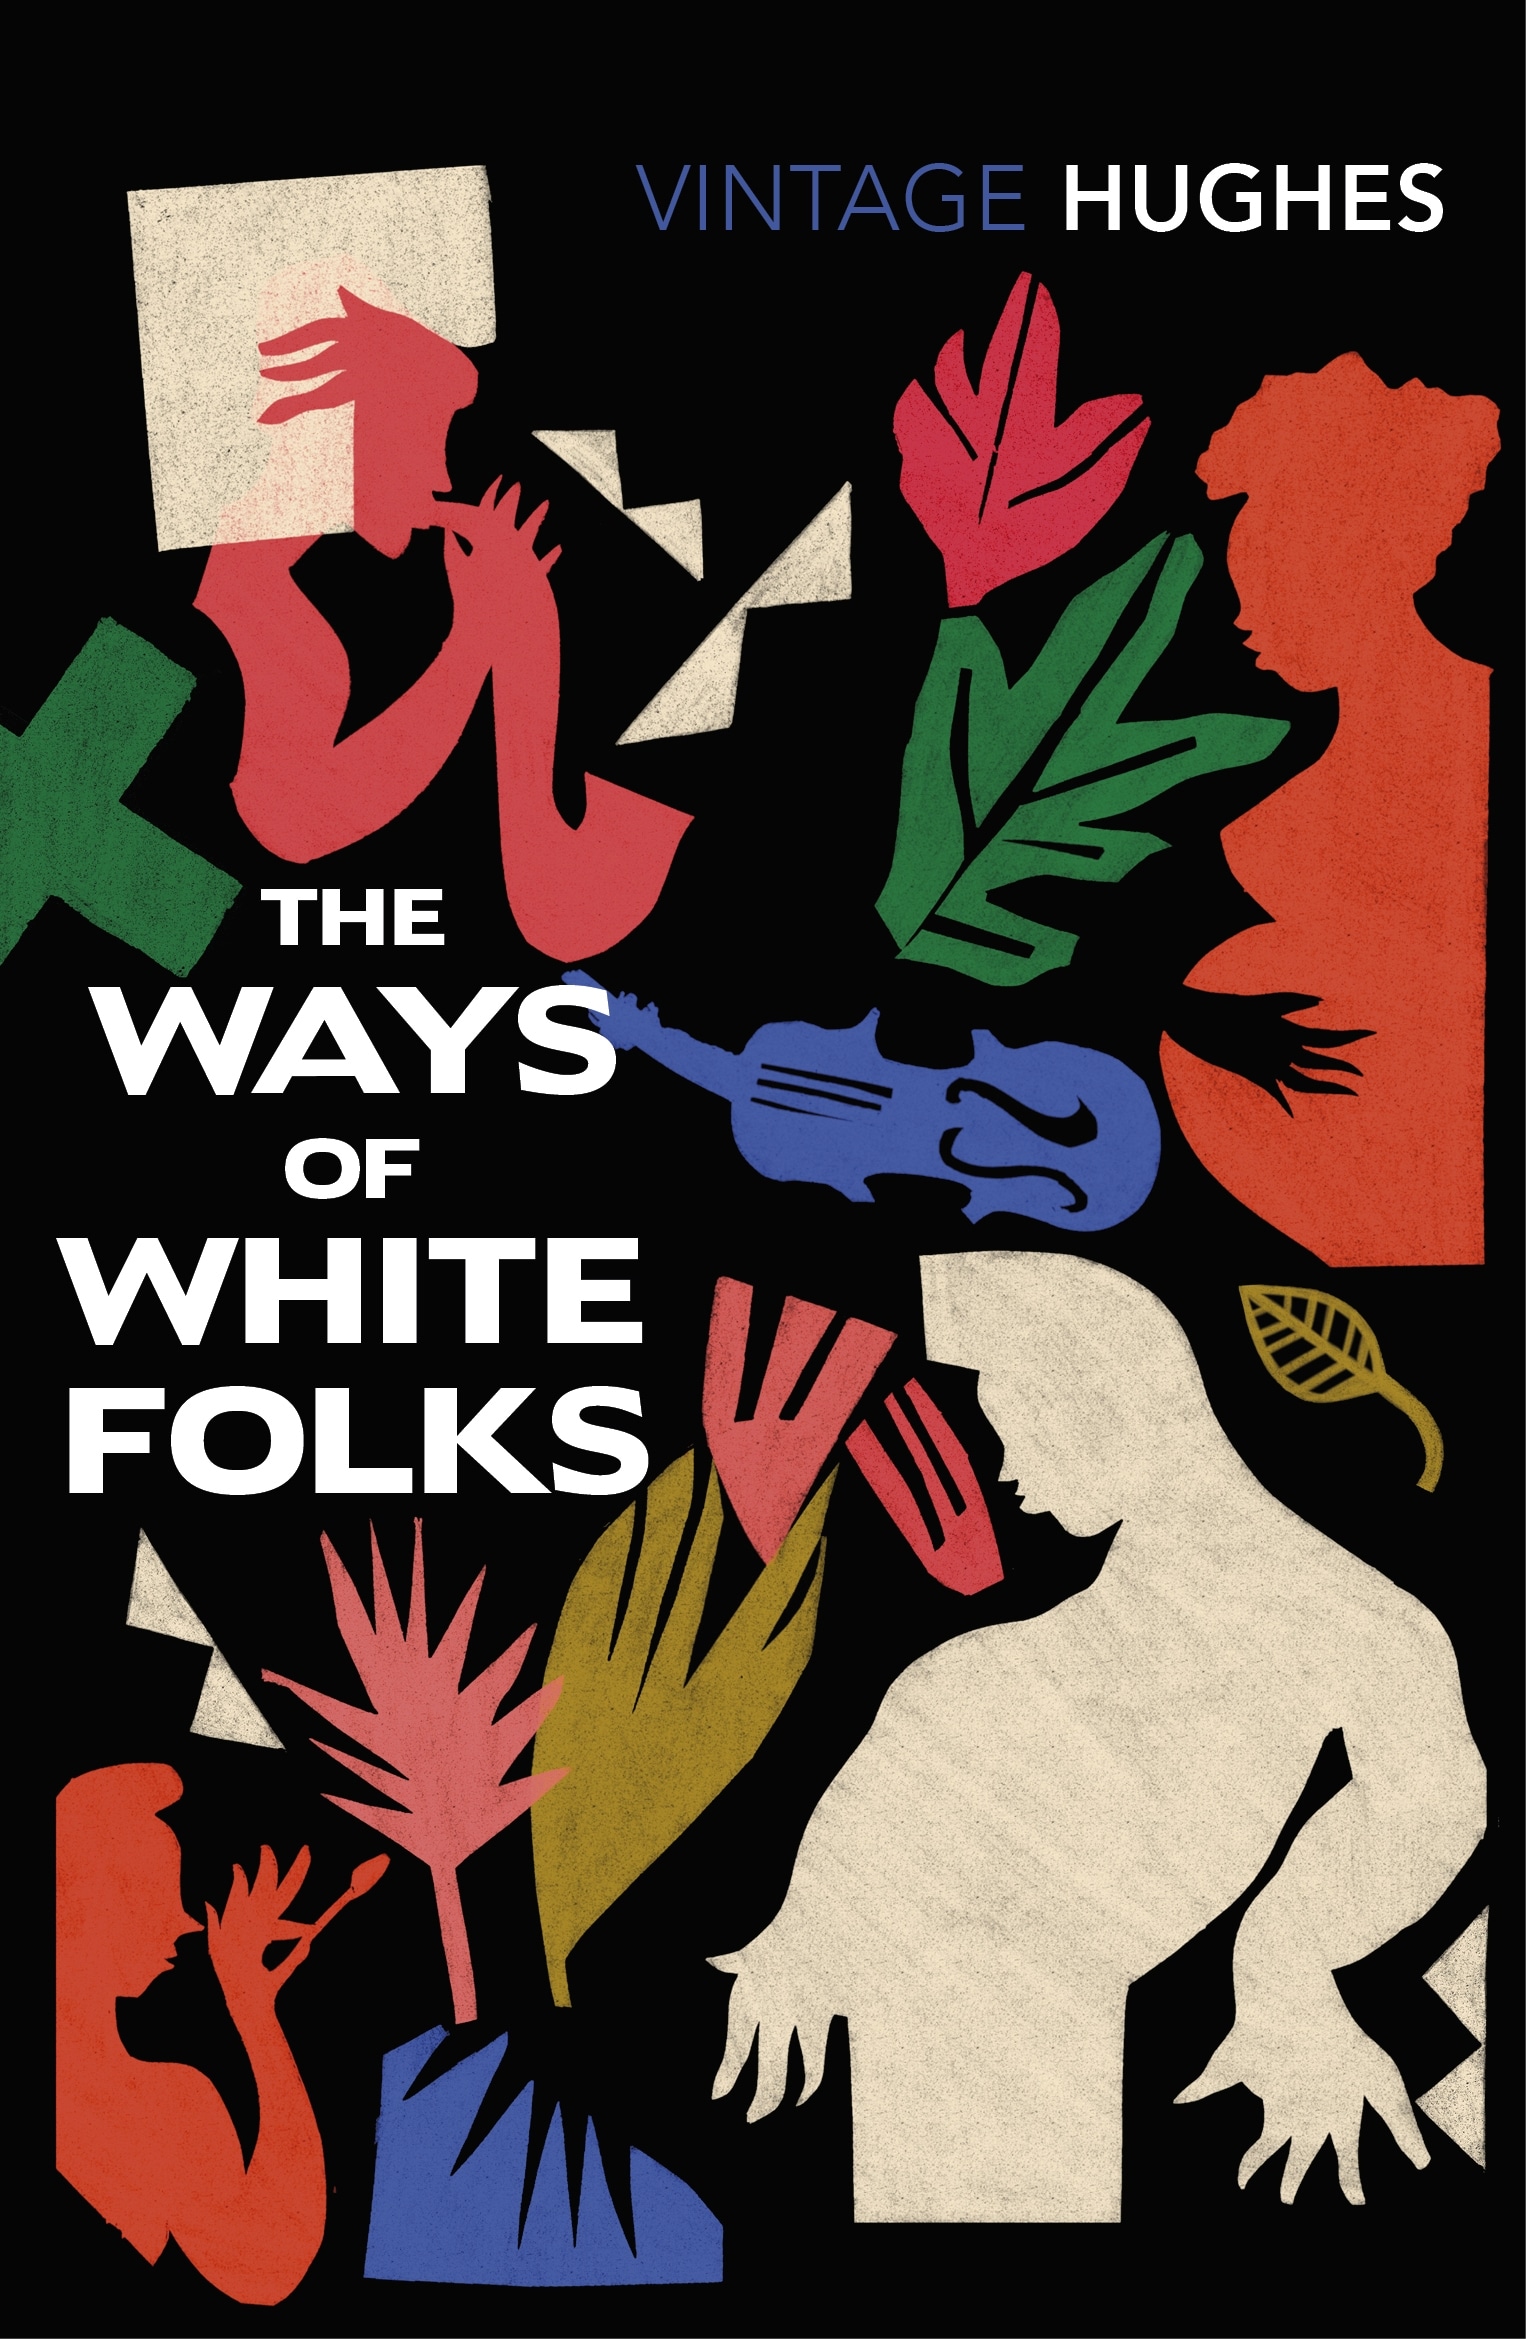 Book “The Ways of White Folks” by Langston Hughes — September 29, 2022